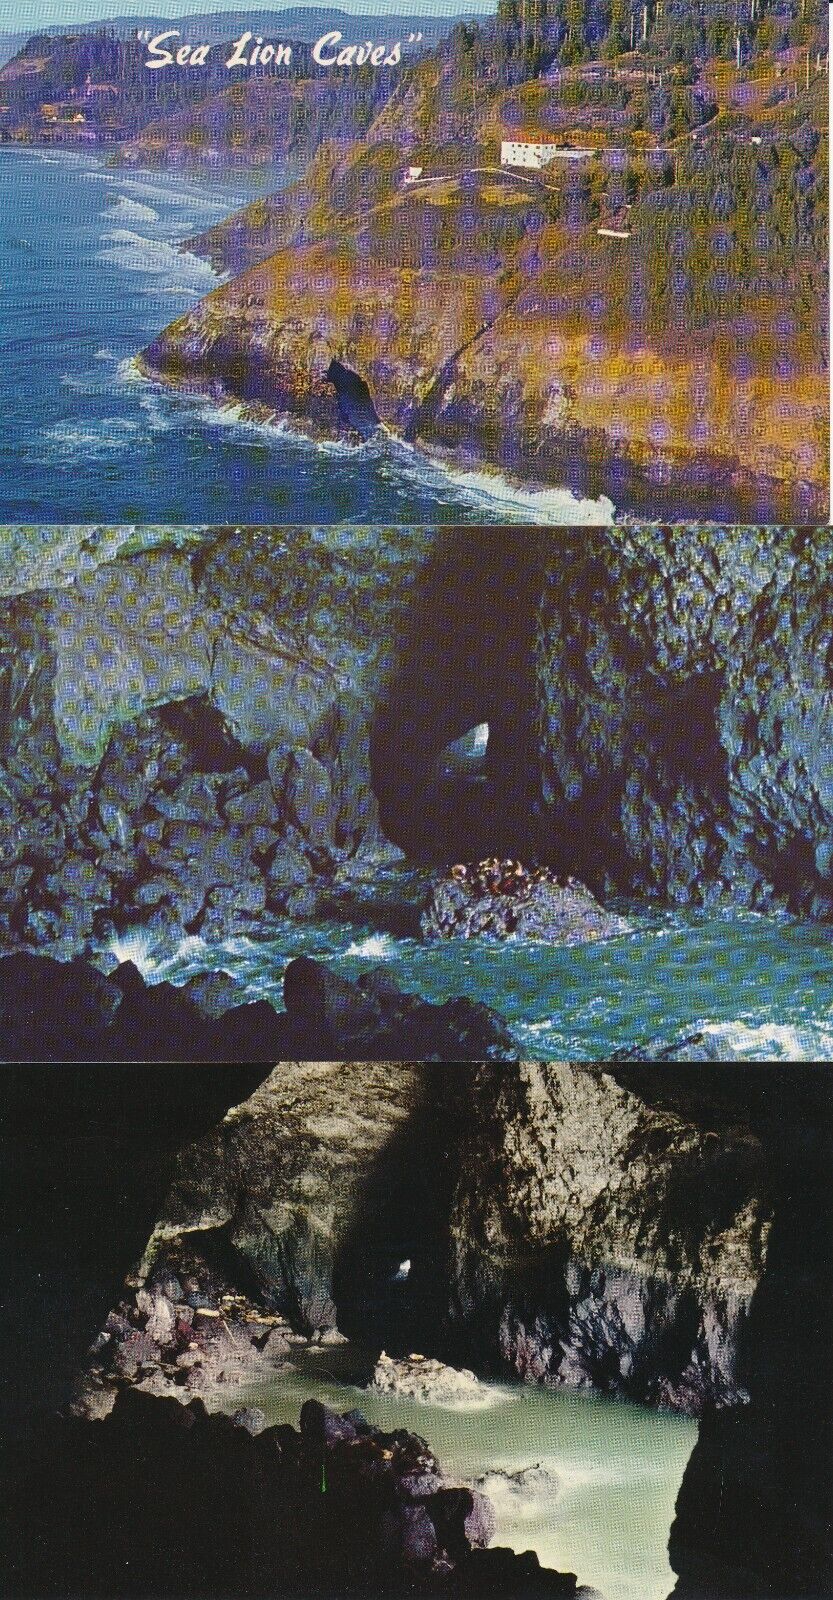 3 Sea Lion Caves, Florence, OR. Postcards